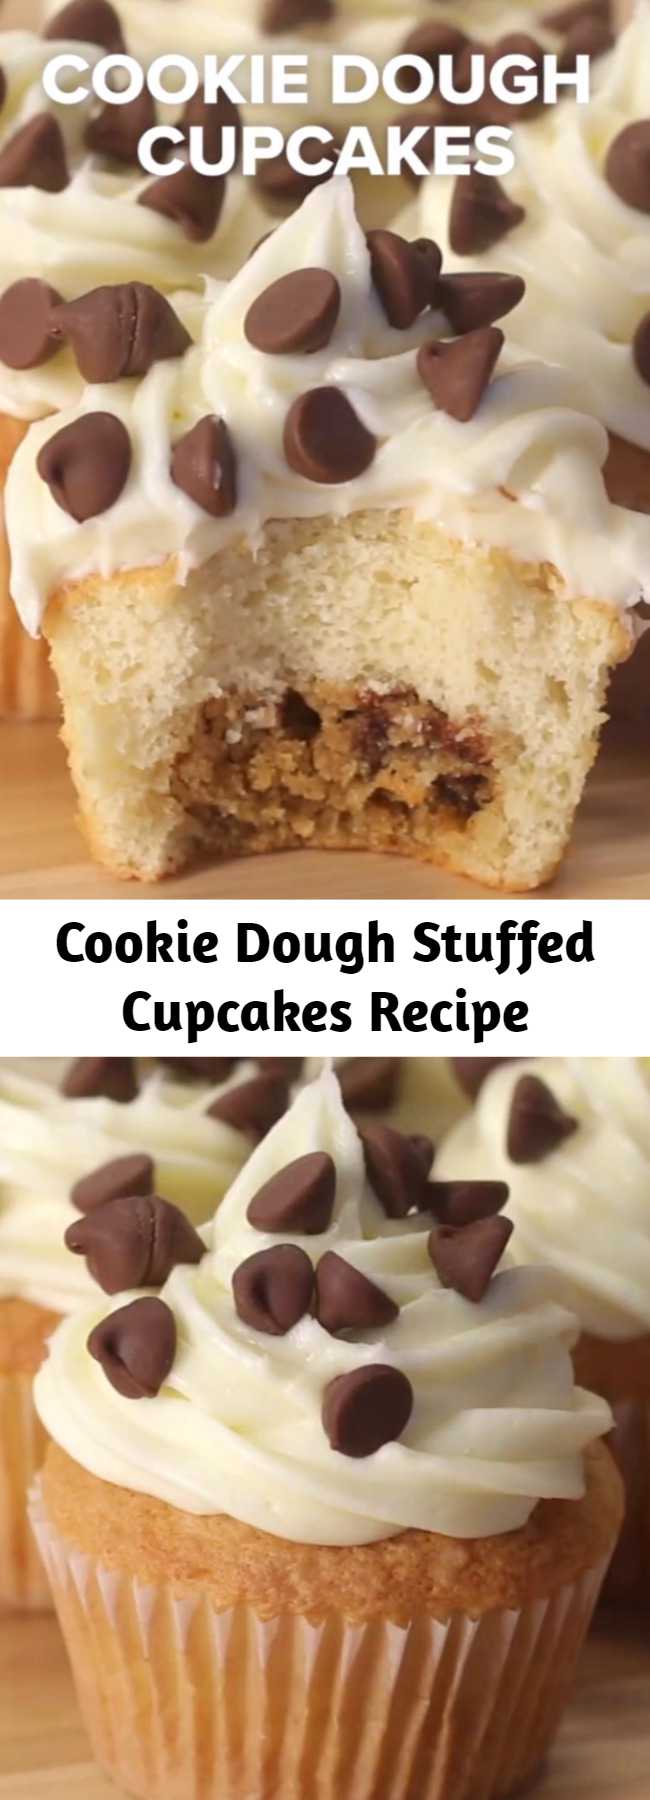 Cookie Dough Stuffed Cupcakes Recipe - Stuffing cookie dough into cupcakes might just be the best thing we've ever done.